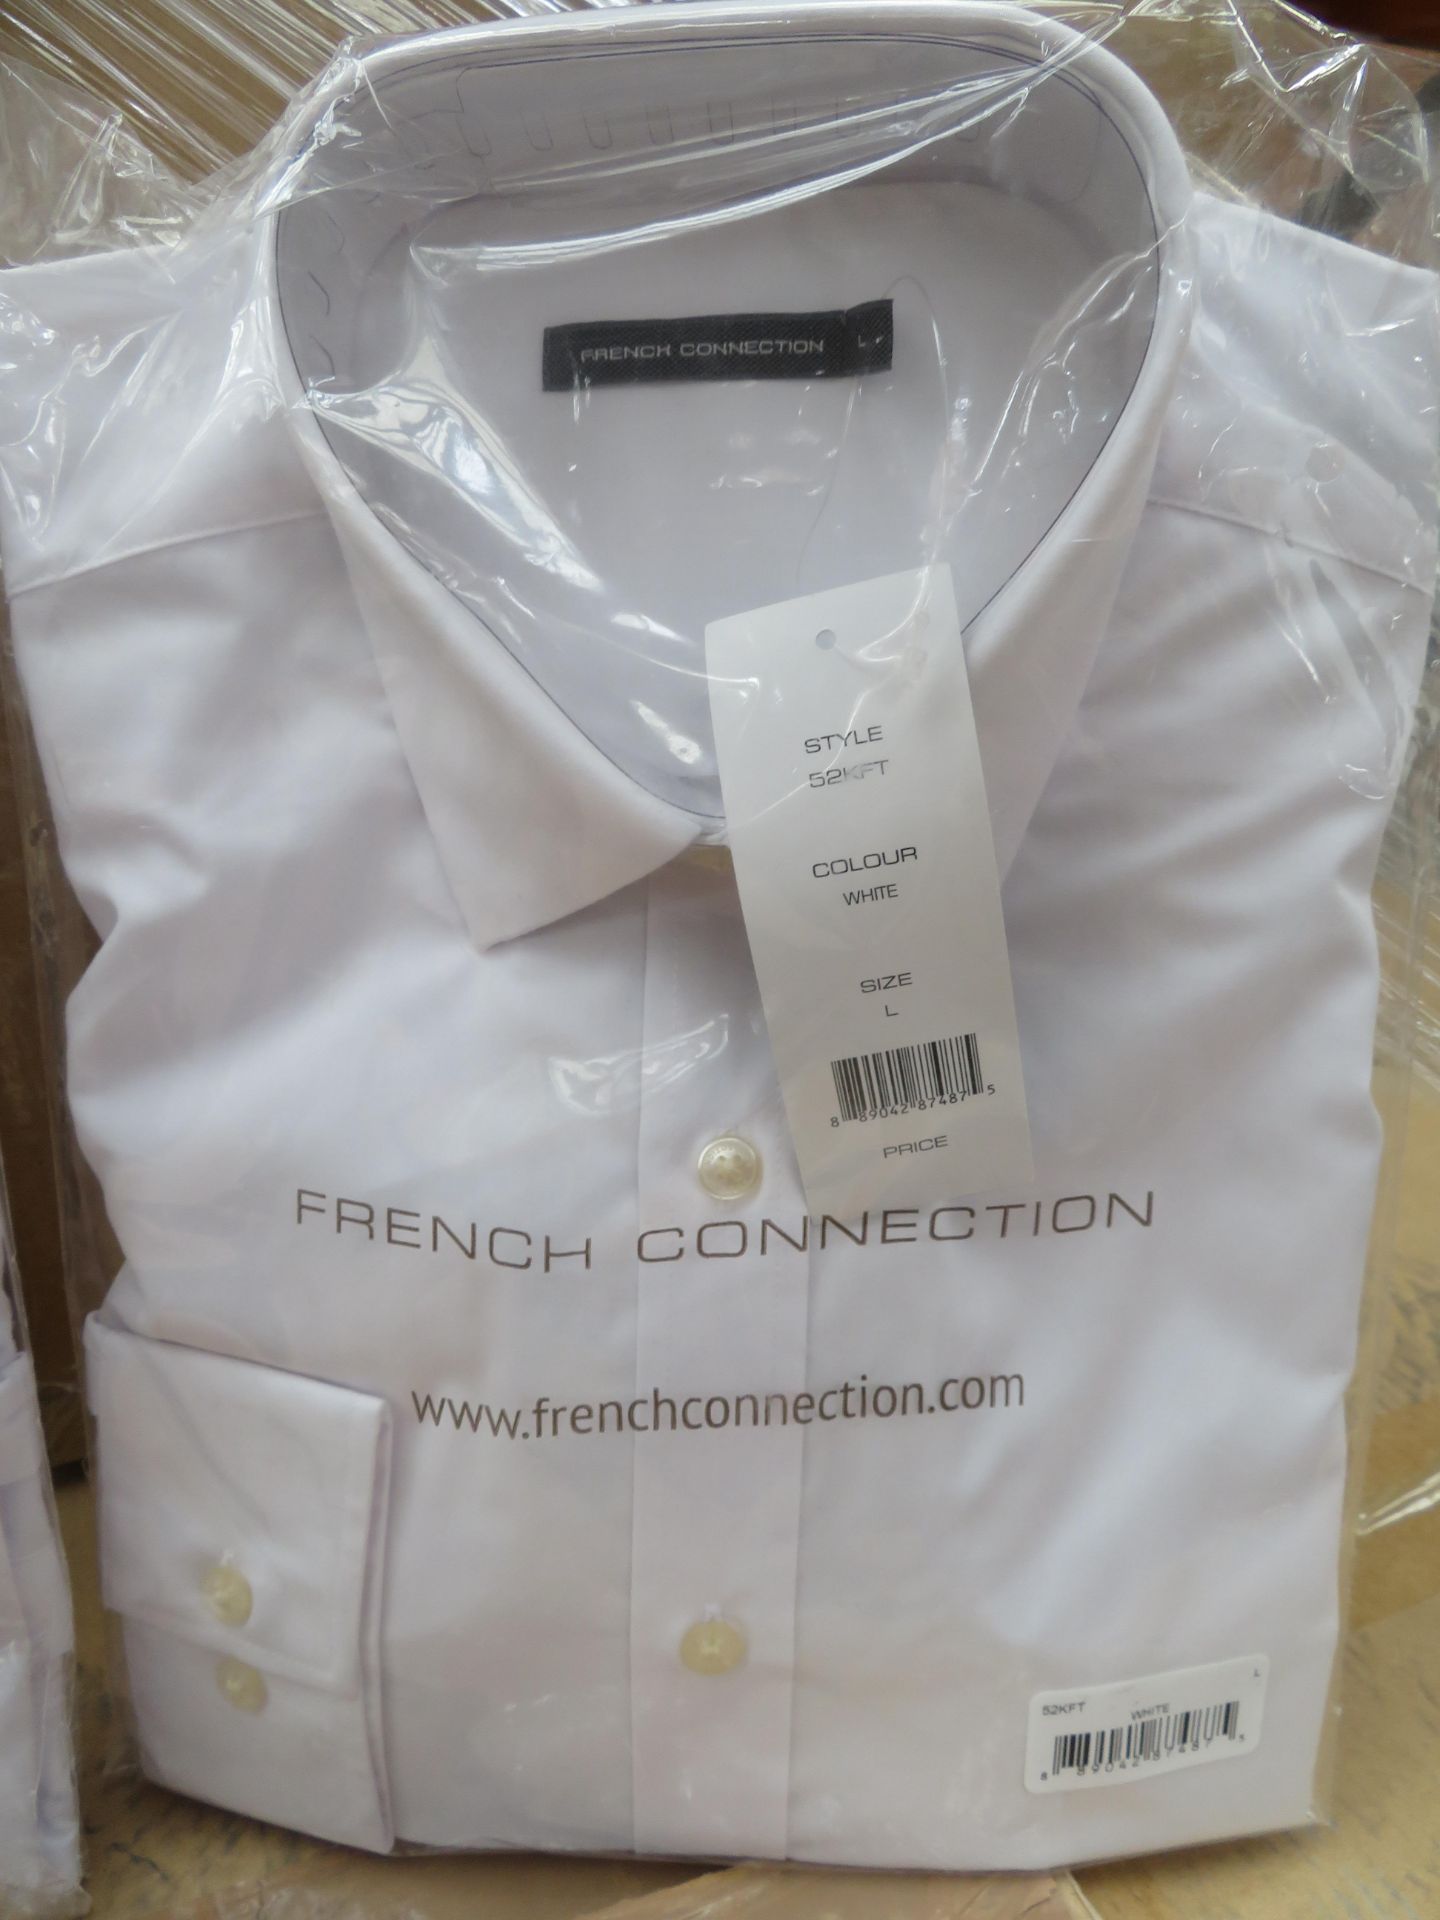 20 x Brand New French Connection Formal White Long Sleeve Shirts in Various Sizes. Huge Re-Sale - Image 2 of 4